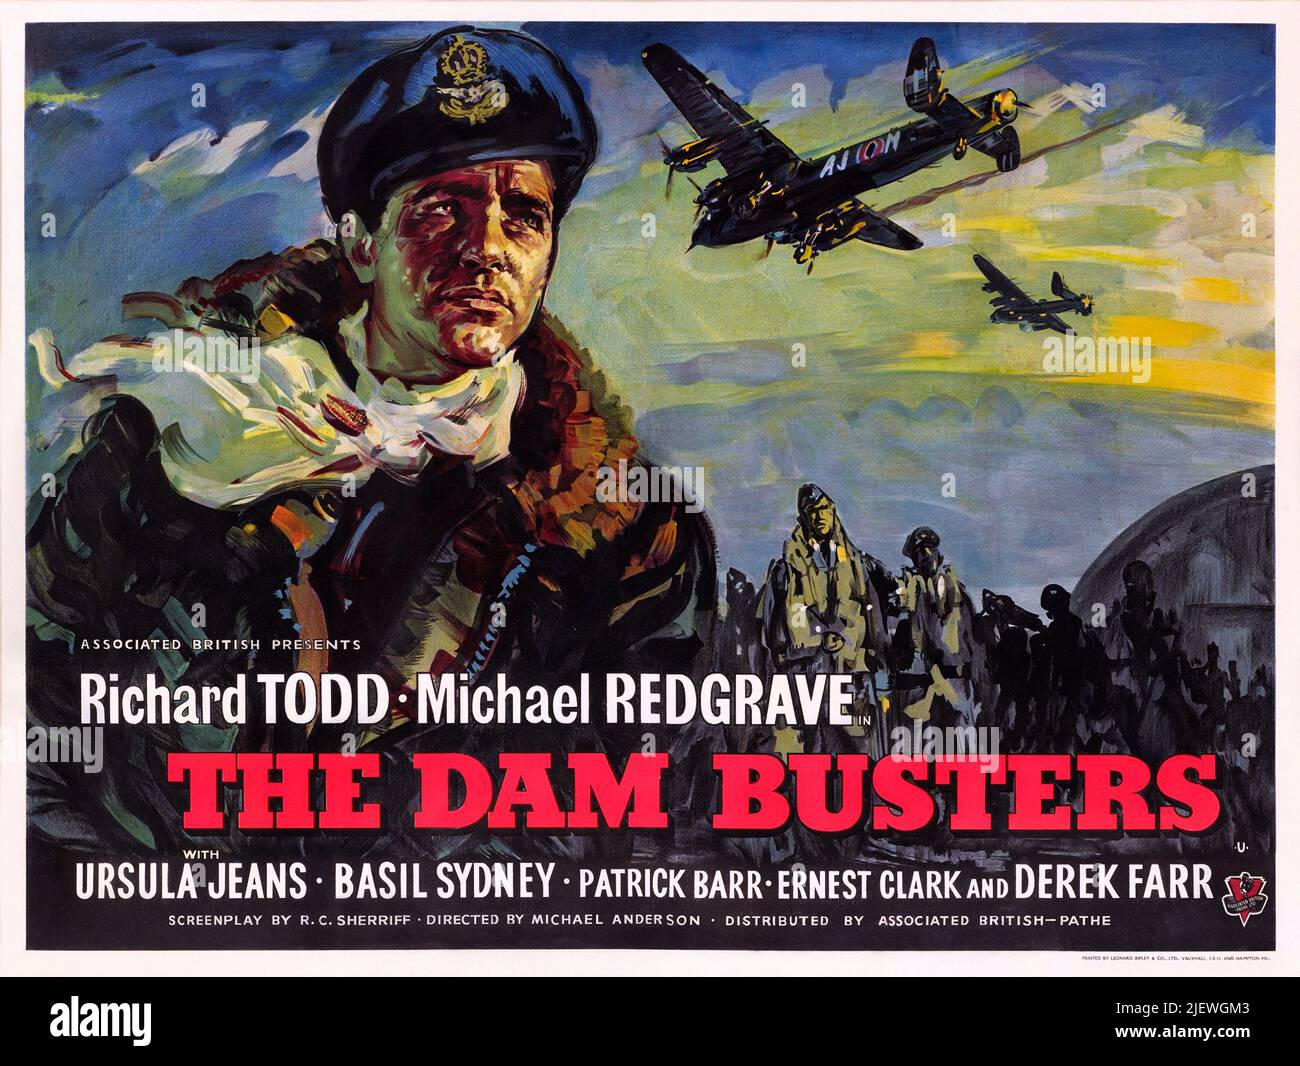 The Dam Busters - Vintage Film Poster - 1955 British war film starring Richard Todd and Michael Redgrave. directed by Michael Anderson. Stock Photo